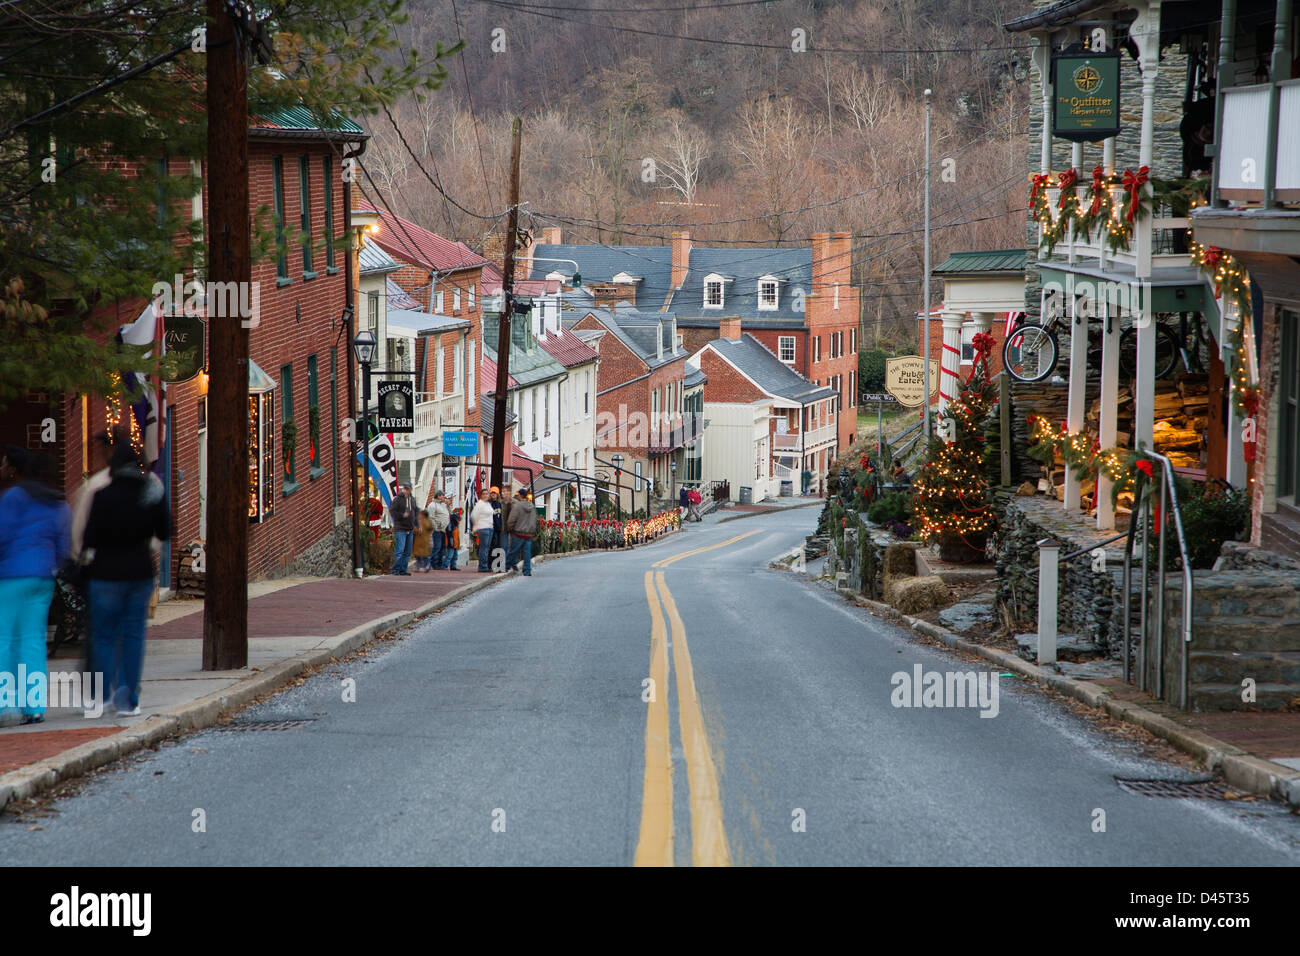 High Street, Harpers Ferry National Historical Park, West Virginia, USA Stock Photo